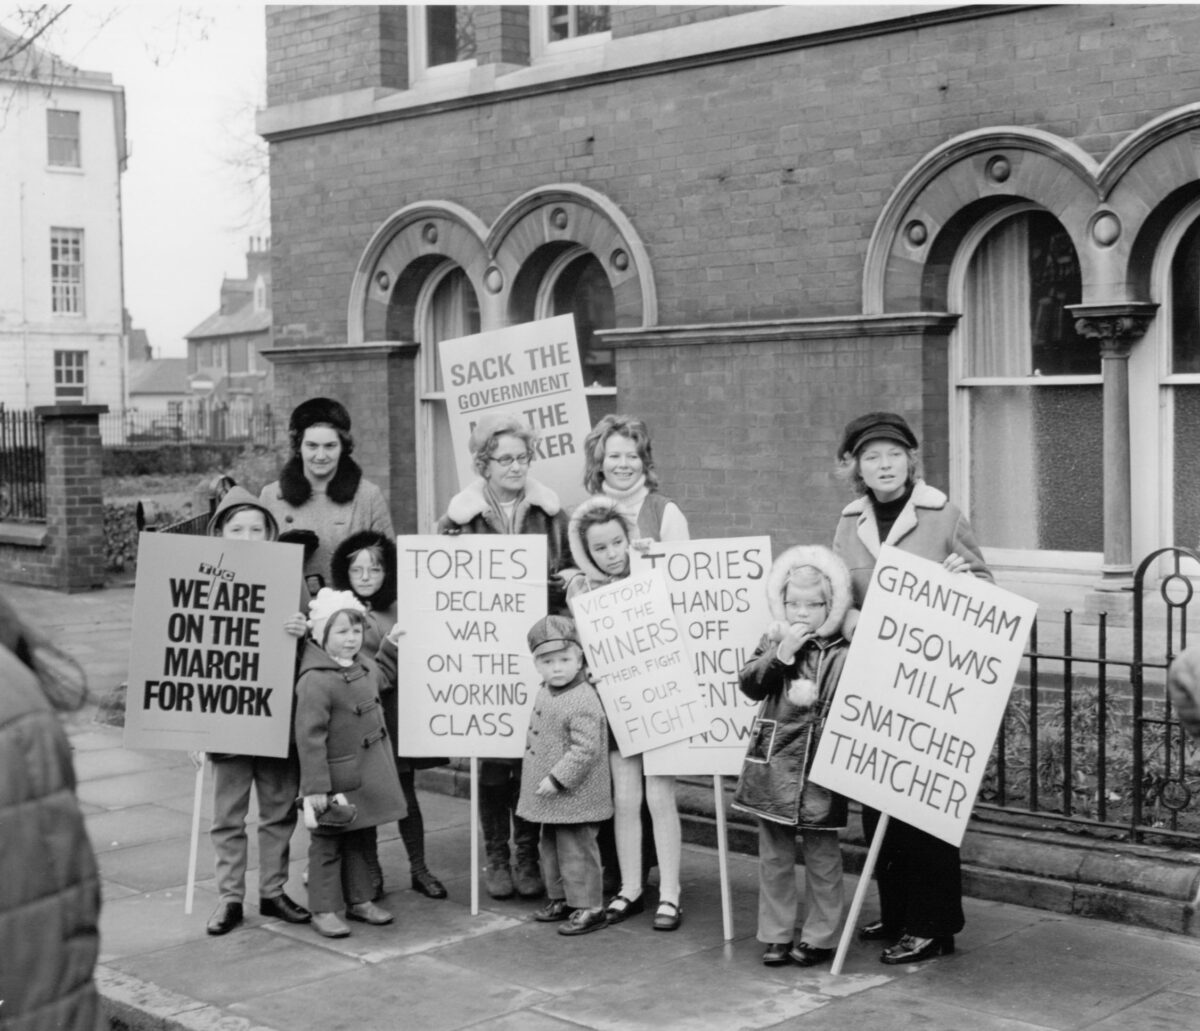 Grantham ladies in protest at Mrs Thatcher